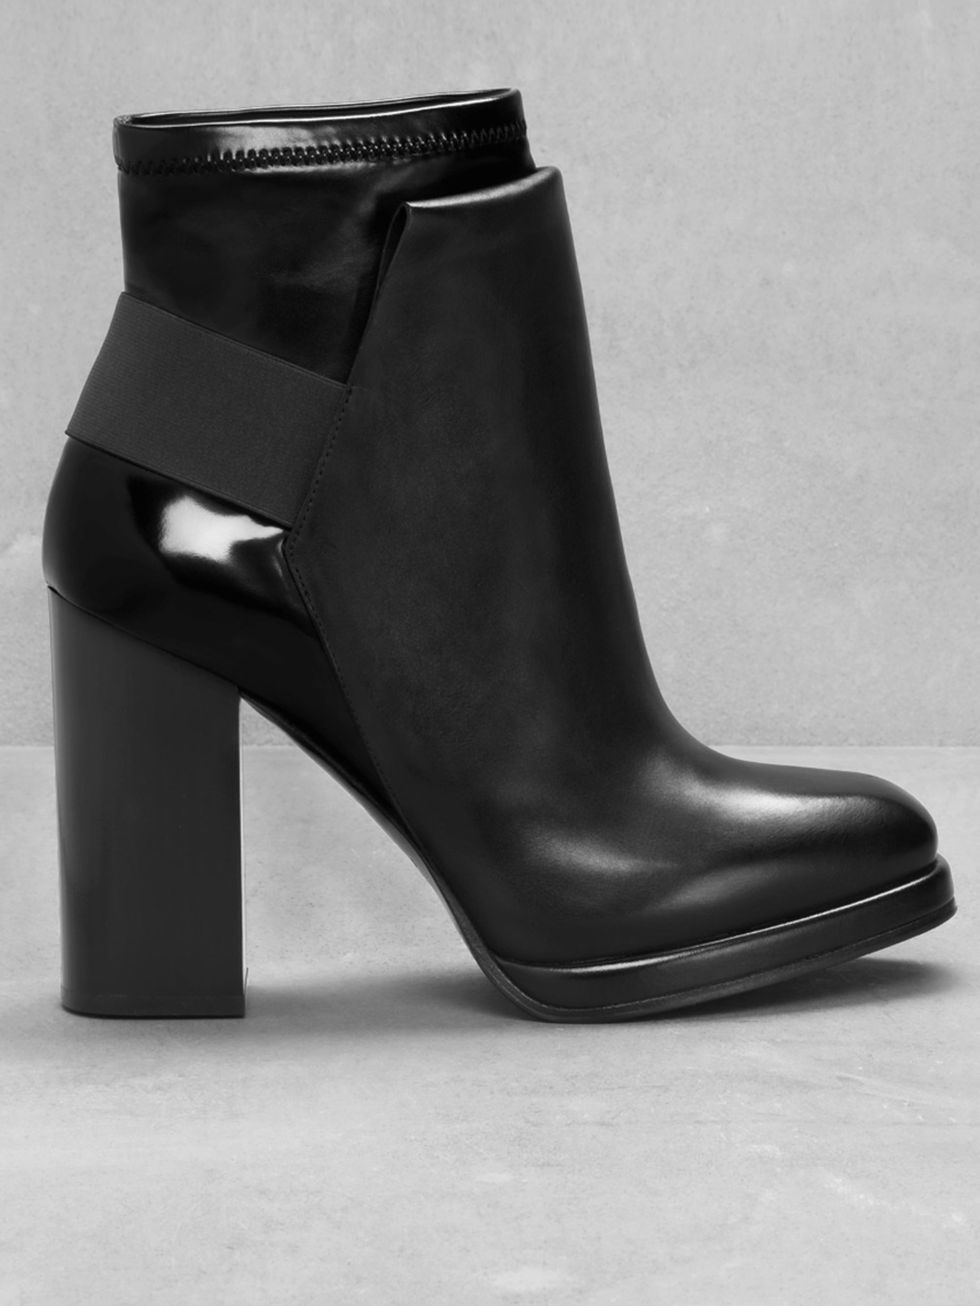 White, Boot, Fashion, Leather, Black, Grey, High heels, Synthetic rubber, Fashion design, Still life photography, 